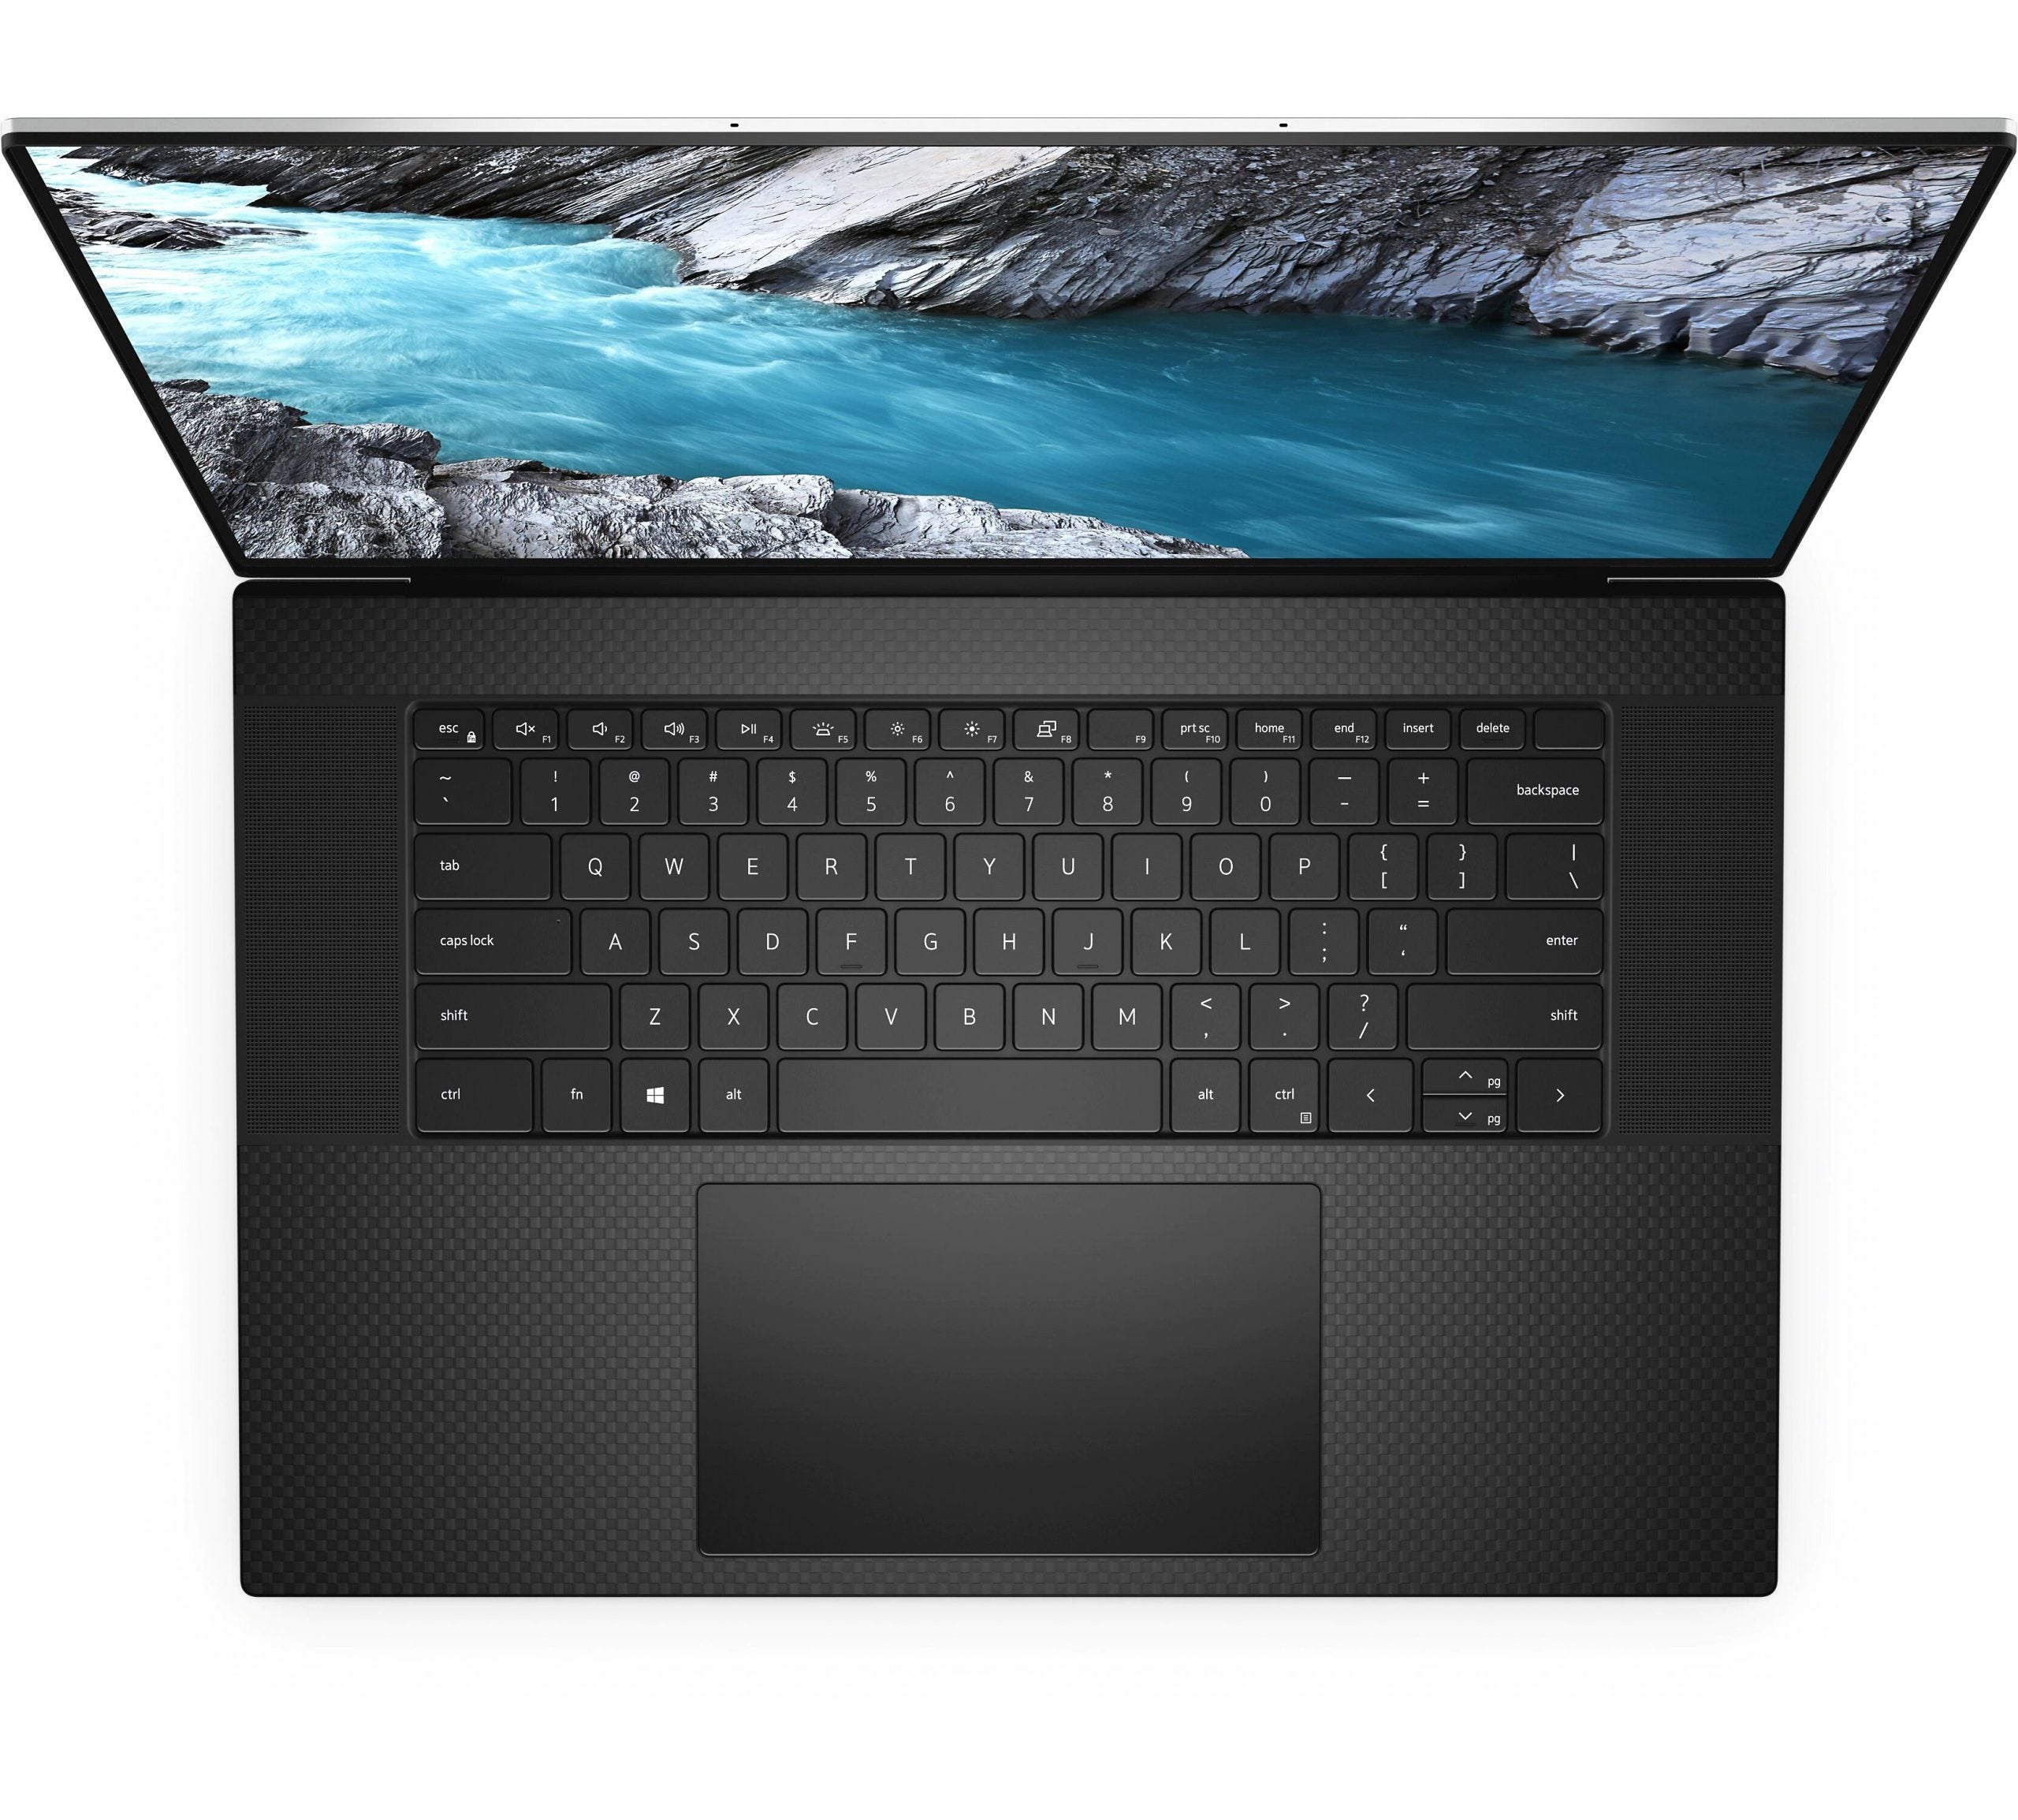 DELL XPS 17 9700 Workstation and gaming notebook 17″ Inch 4K | Intel Core i7-10750H 2.6Ghz | Ram 16Gb DDR4 | SSD 1Tb | Nvidia GTX 1650Ti 4Gb | Windows 10 Pro